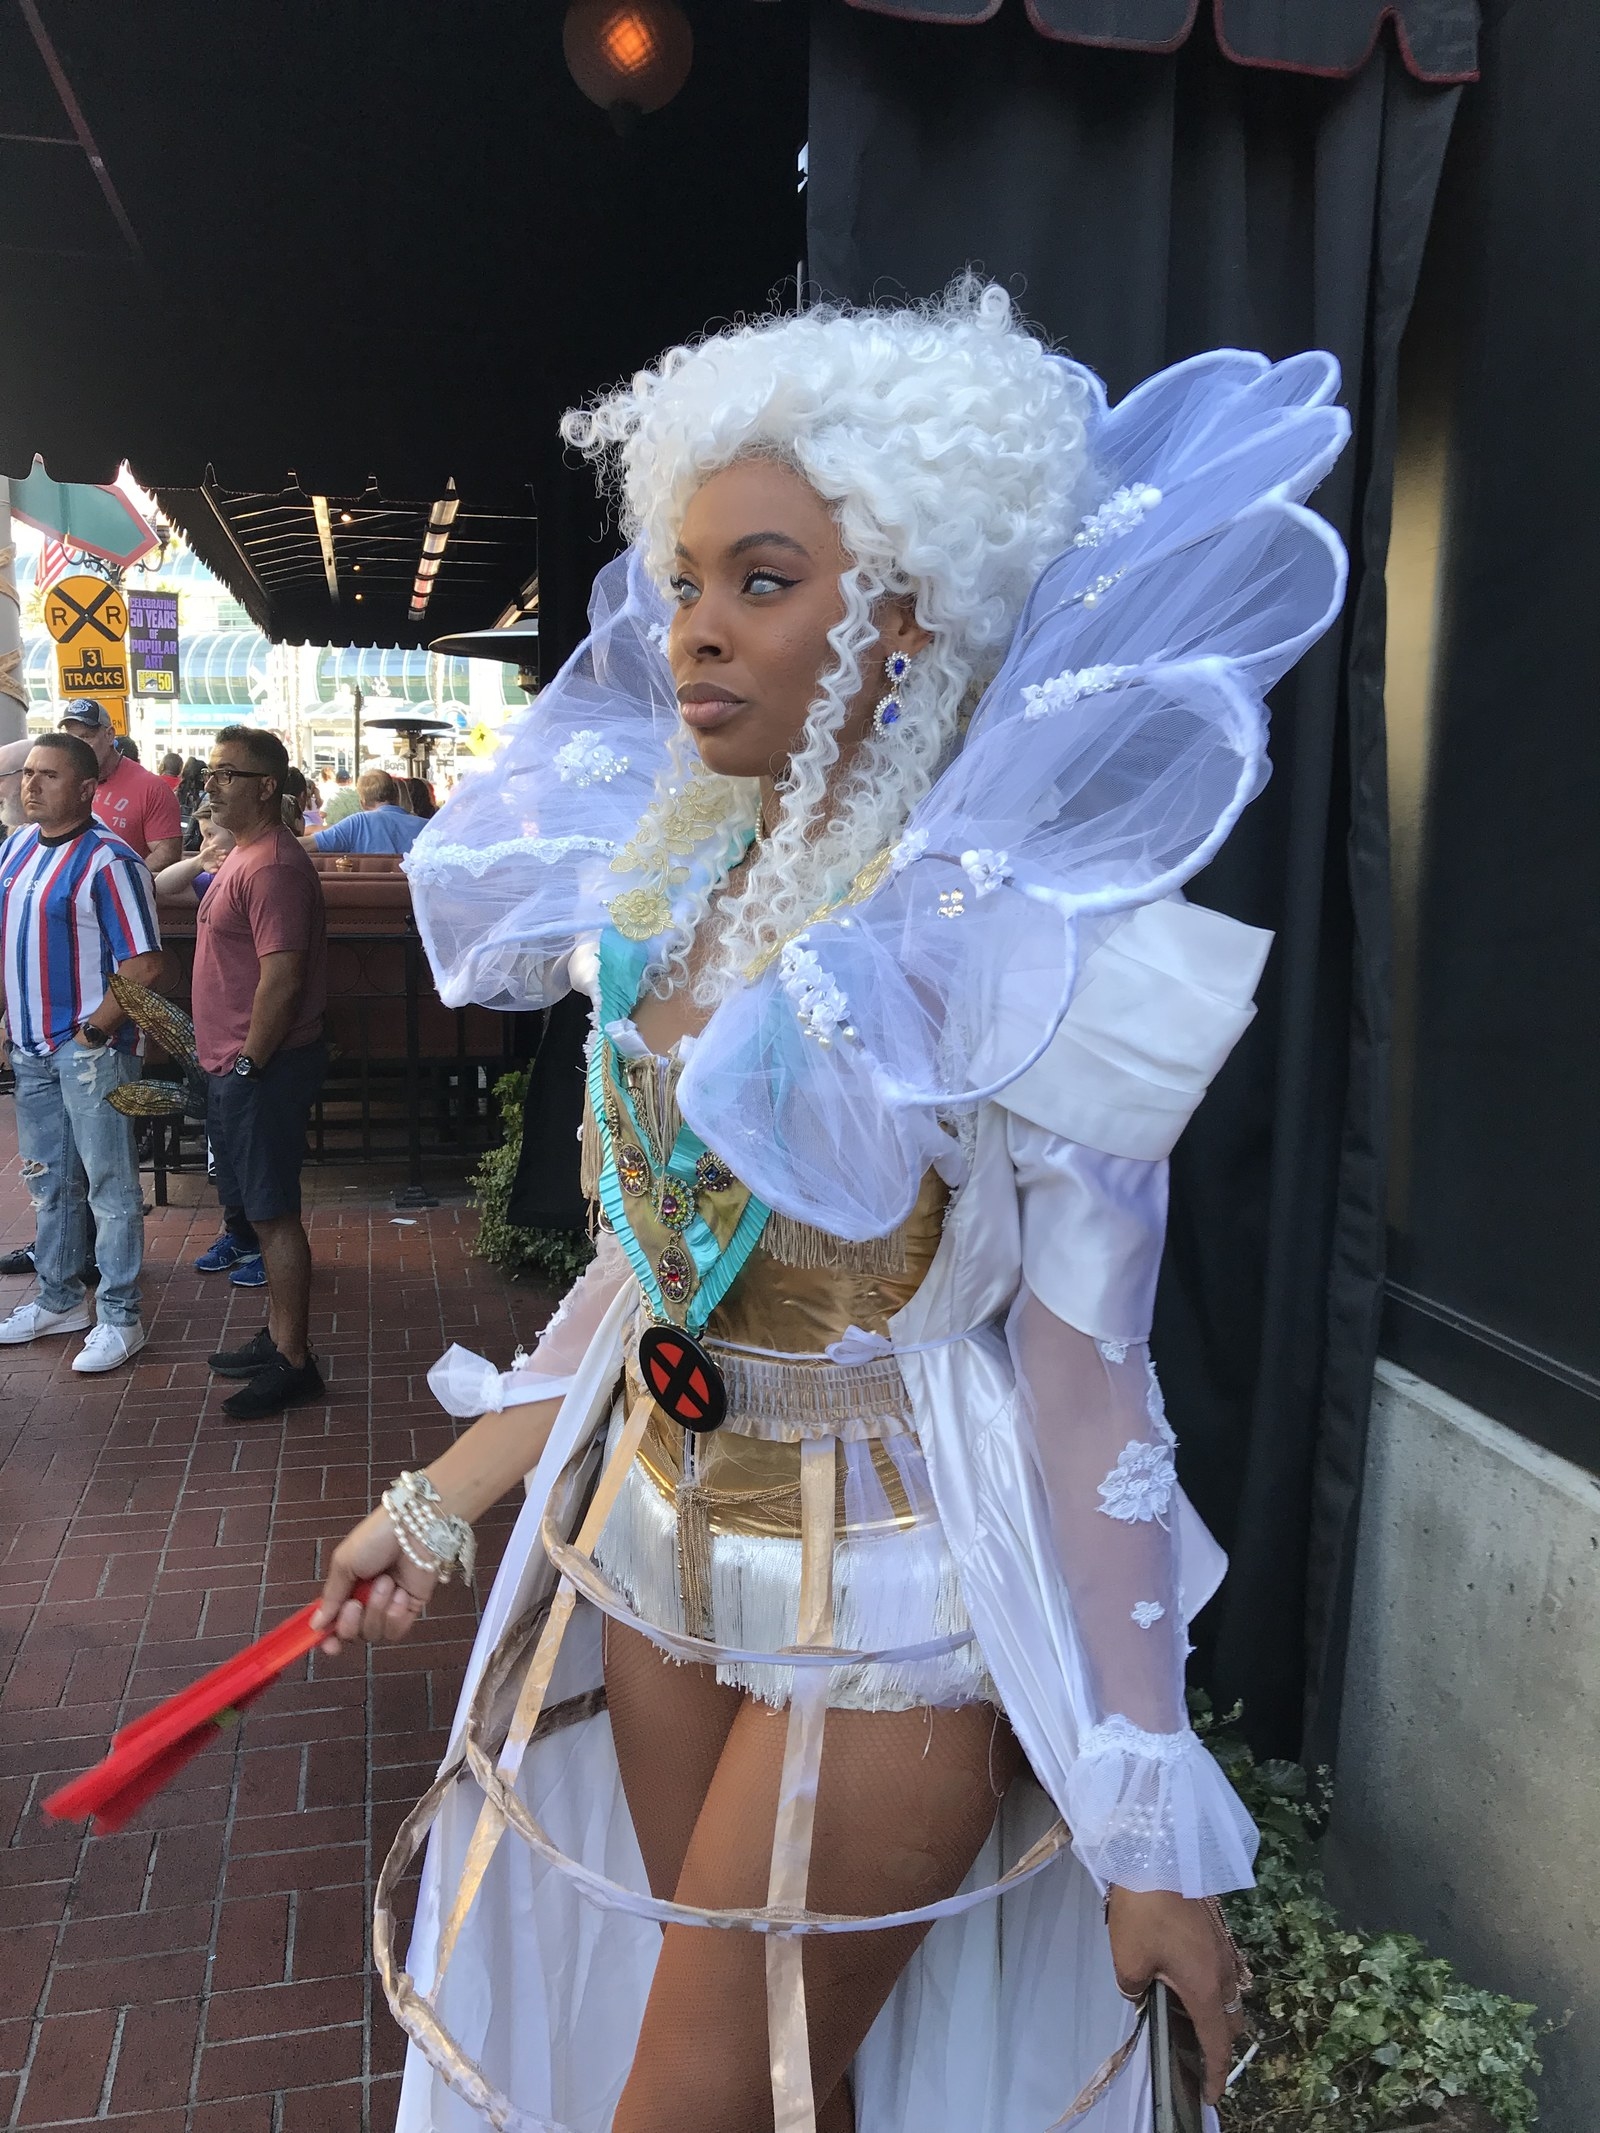 A Black Model Received Racist Harassment for Anime Cosplay